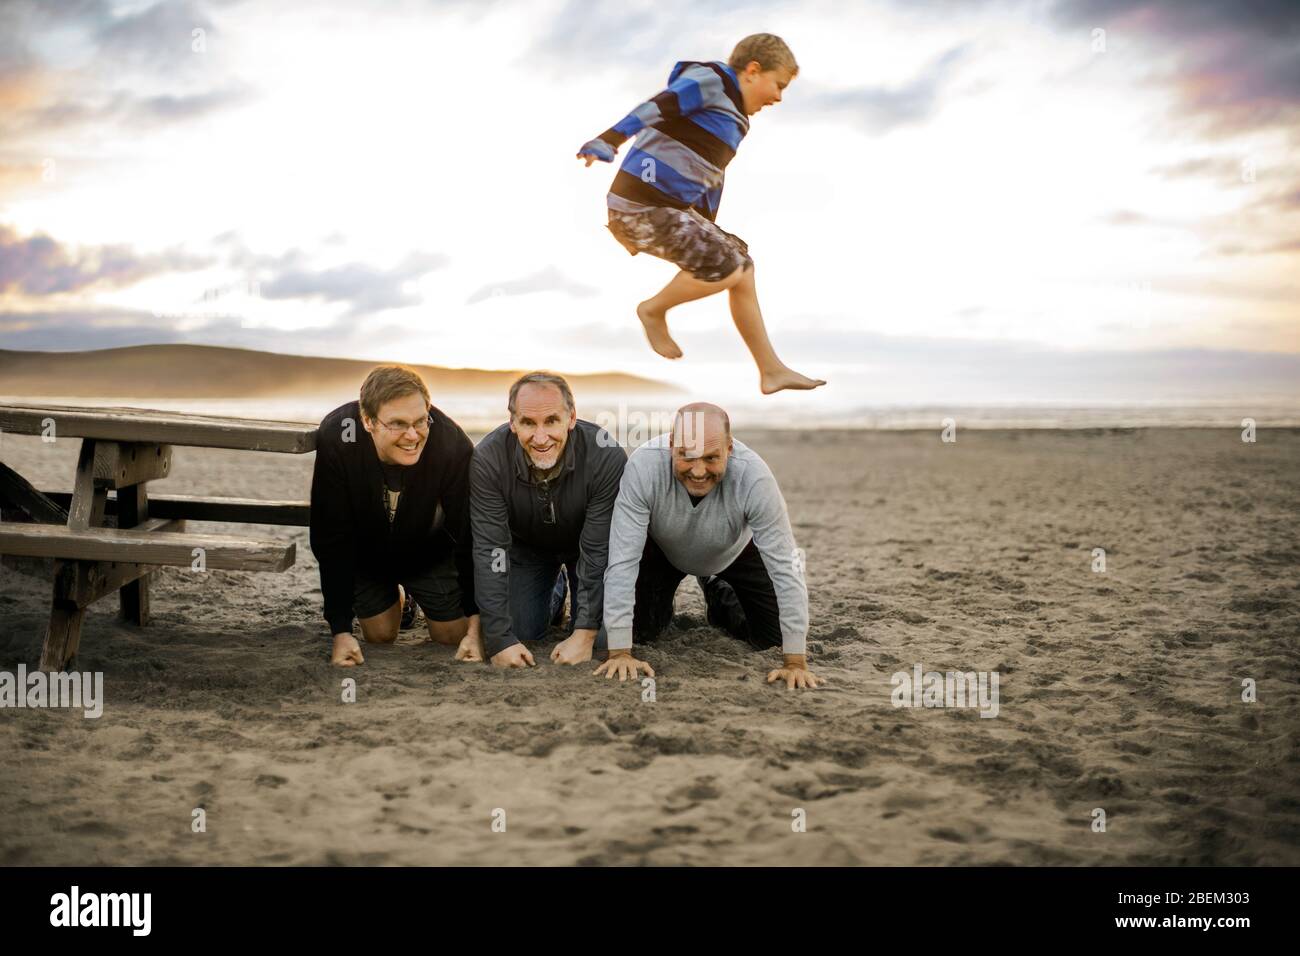 Playful young boy leaping over three kneeling men Stock Photo